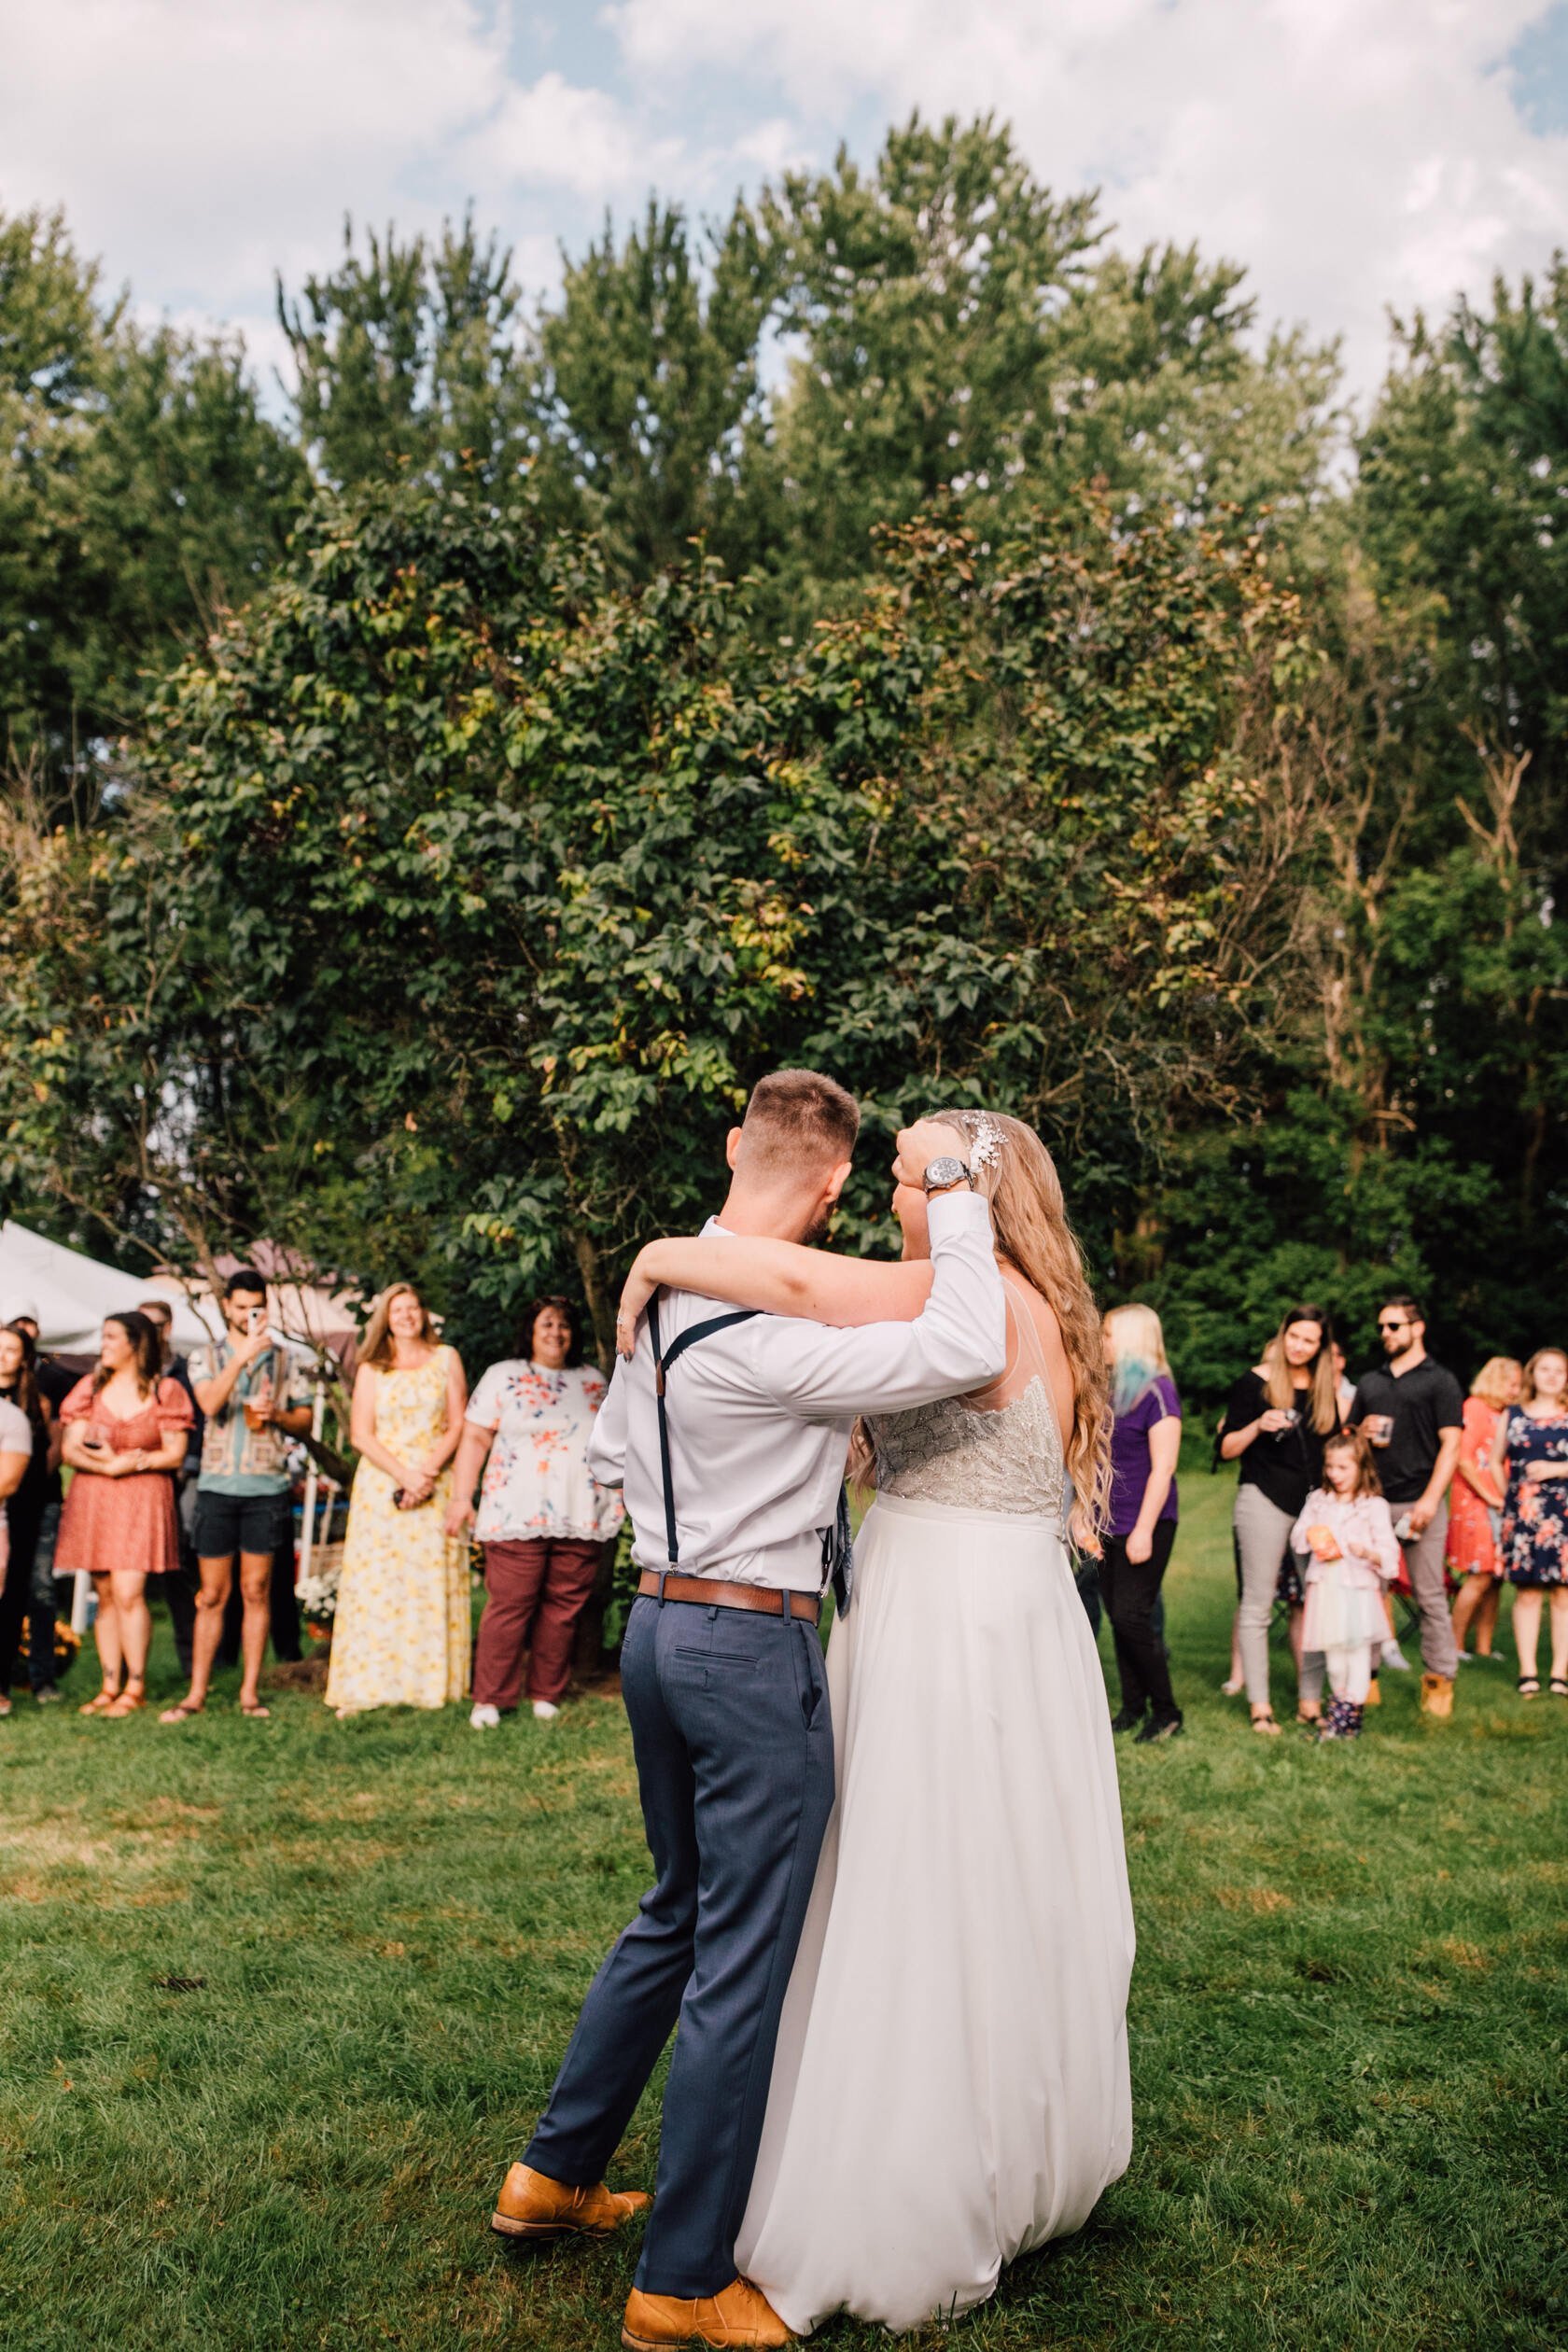  Groom celebrates his first dance with his wife at their backyard wedding 